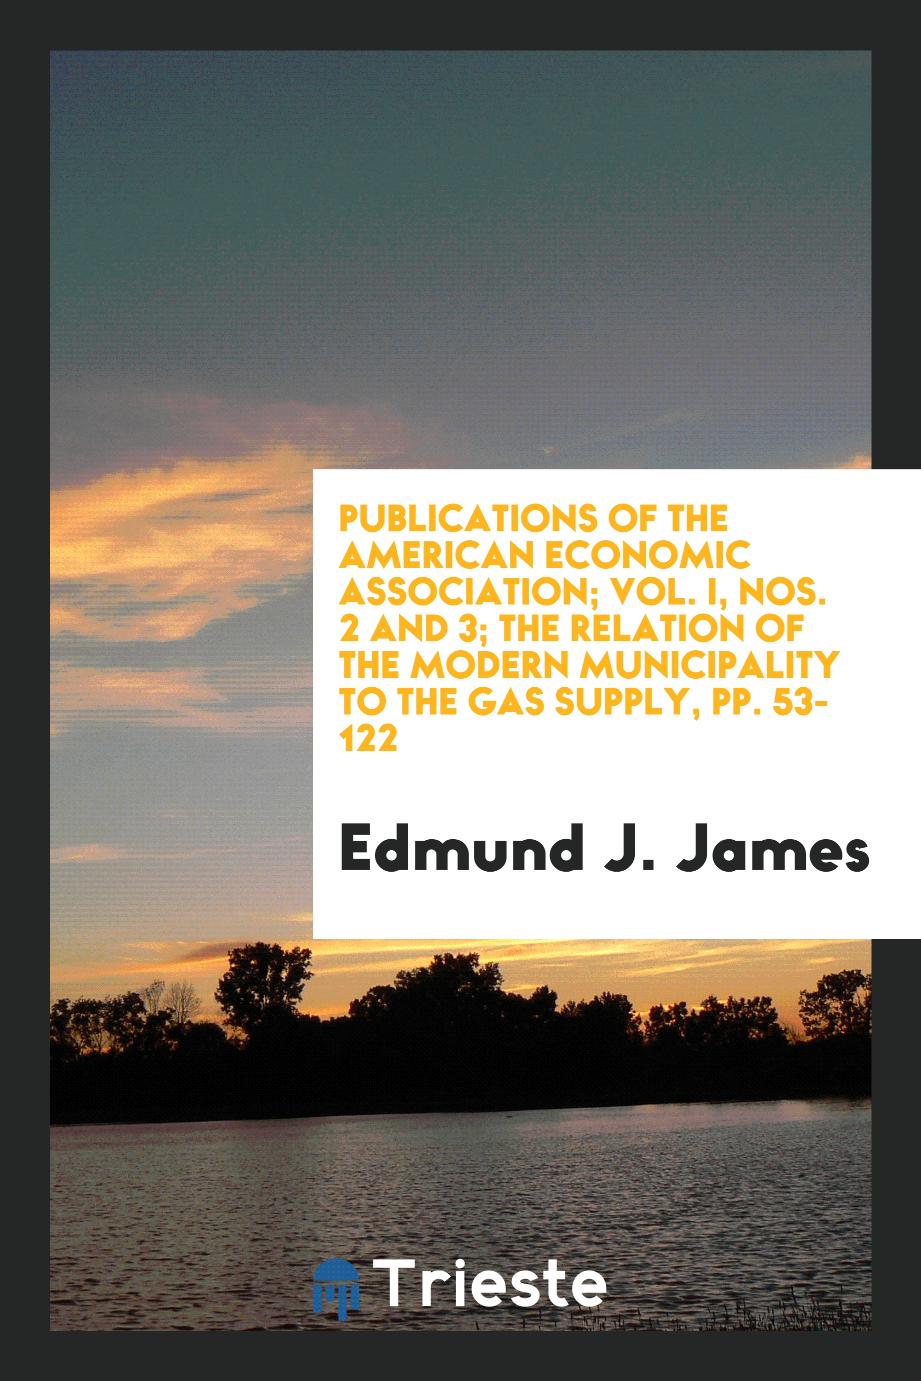 Publications of the American Economic Association; Vol. I, Nos. 2 and 3; The Relation of the Modern Municipality to the Gas Supply, pp. 53-122